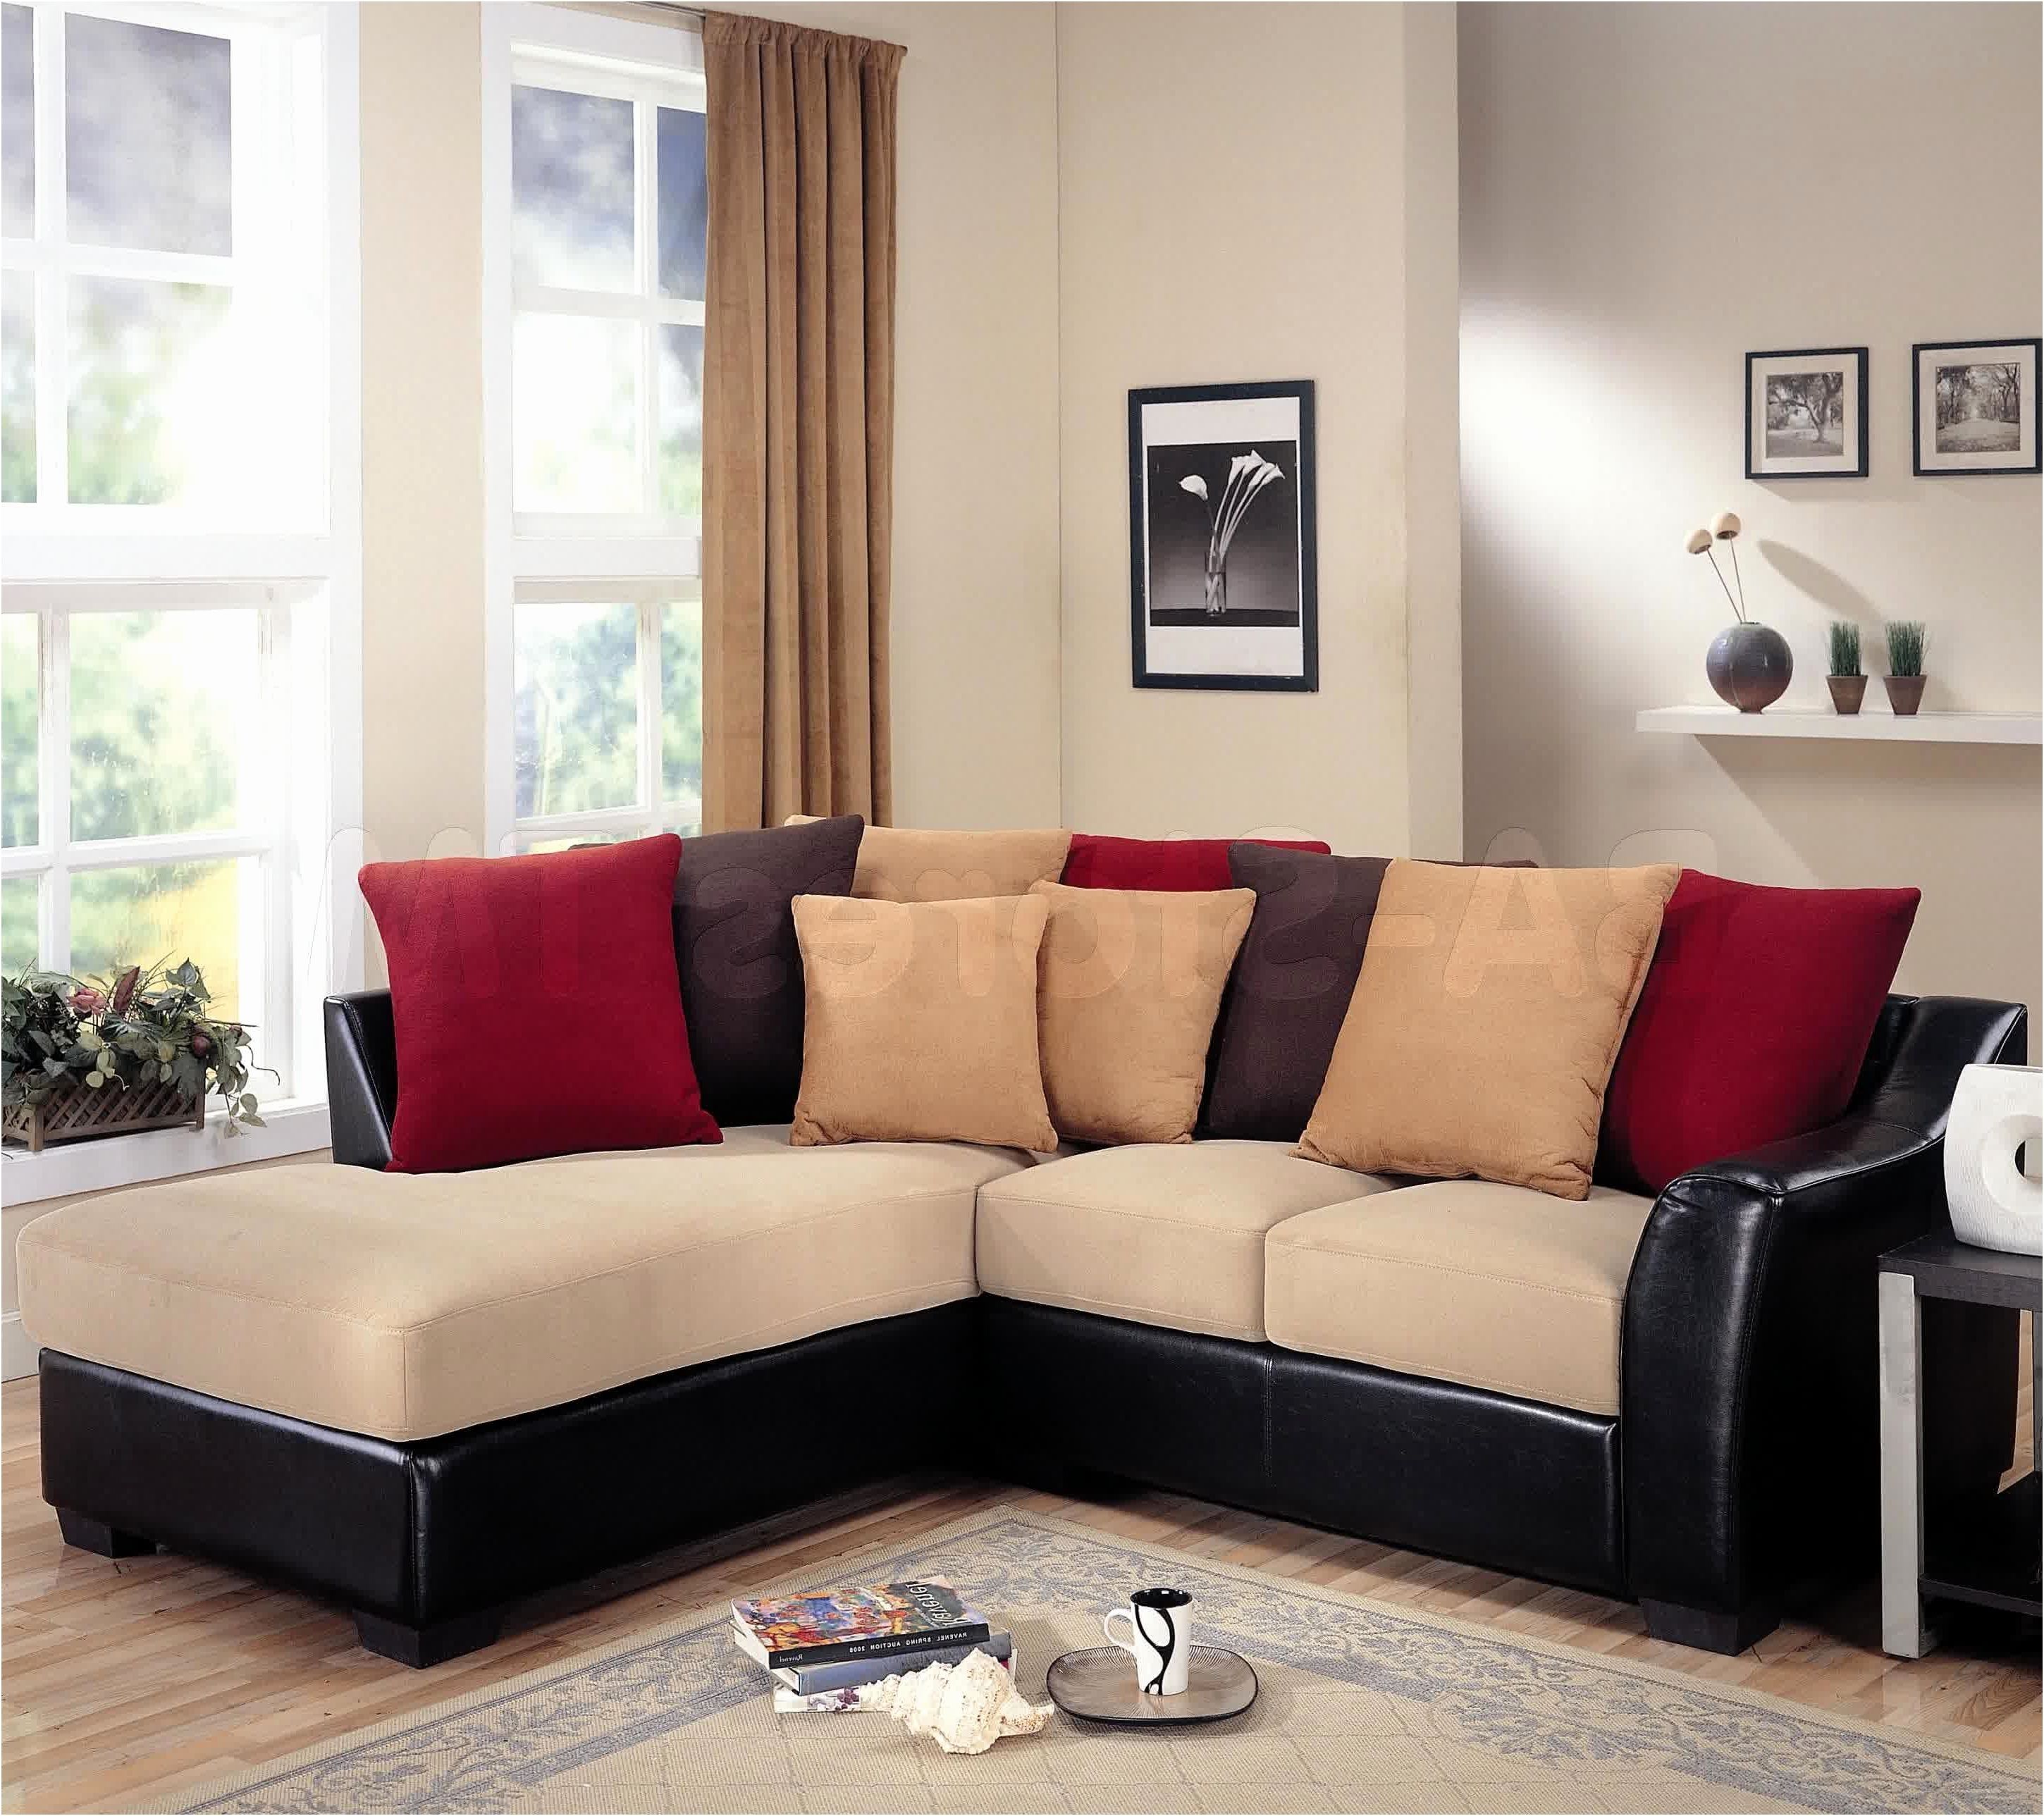 Sears Sectional Sofas In 2019 Fresh Sears Leather Sofa New – Intuisiblog (View 12 of 20)